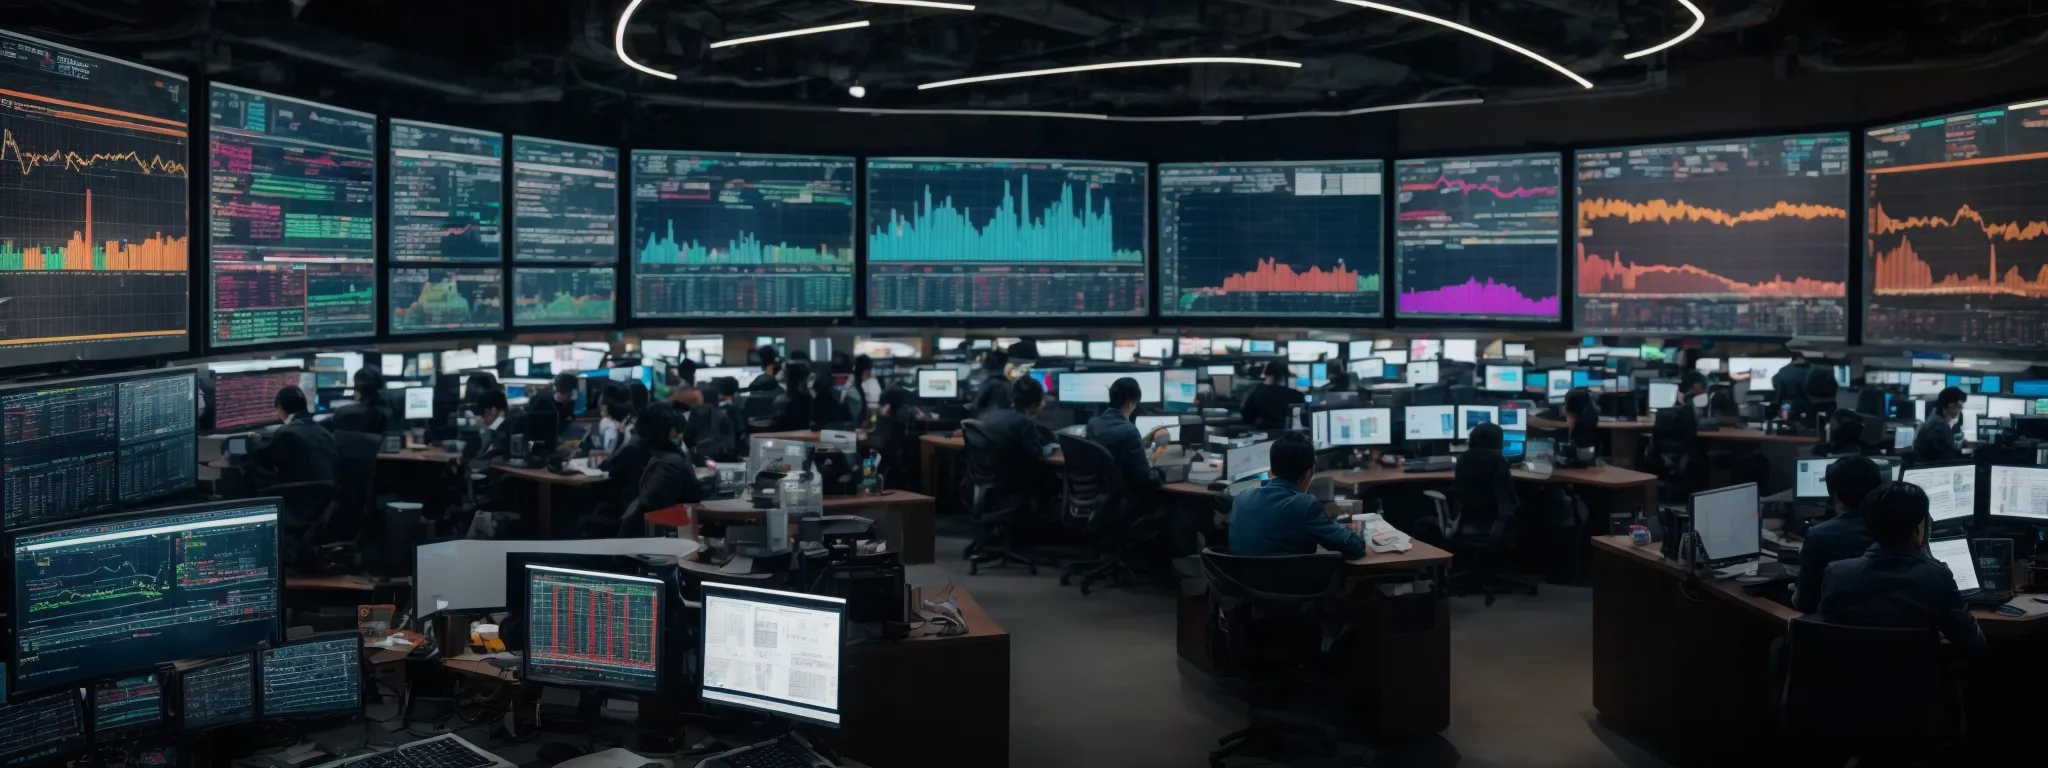 a bustling digital advertising control center with multiple screens displaying colorful graphs and analytics dashboards.